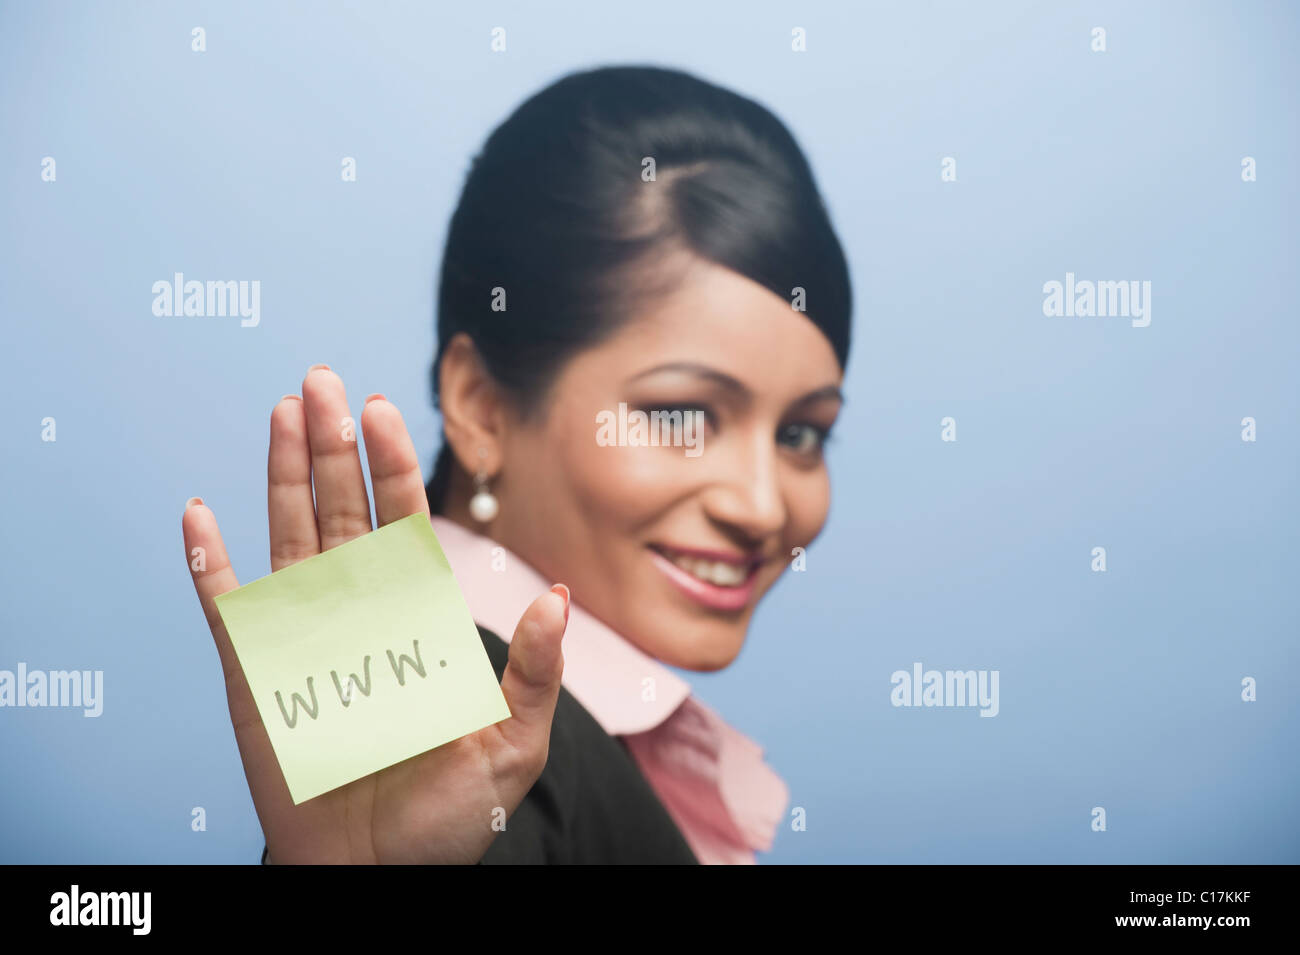 Woman showing her palm with adhesive note stuck on it Stock Photo